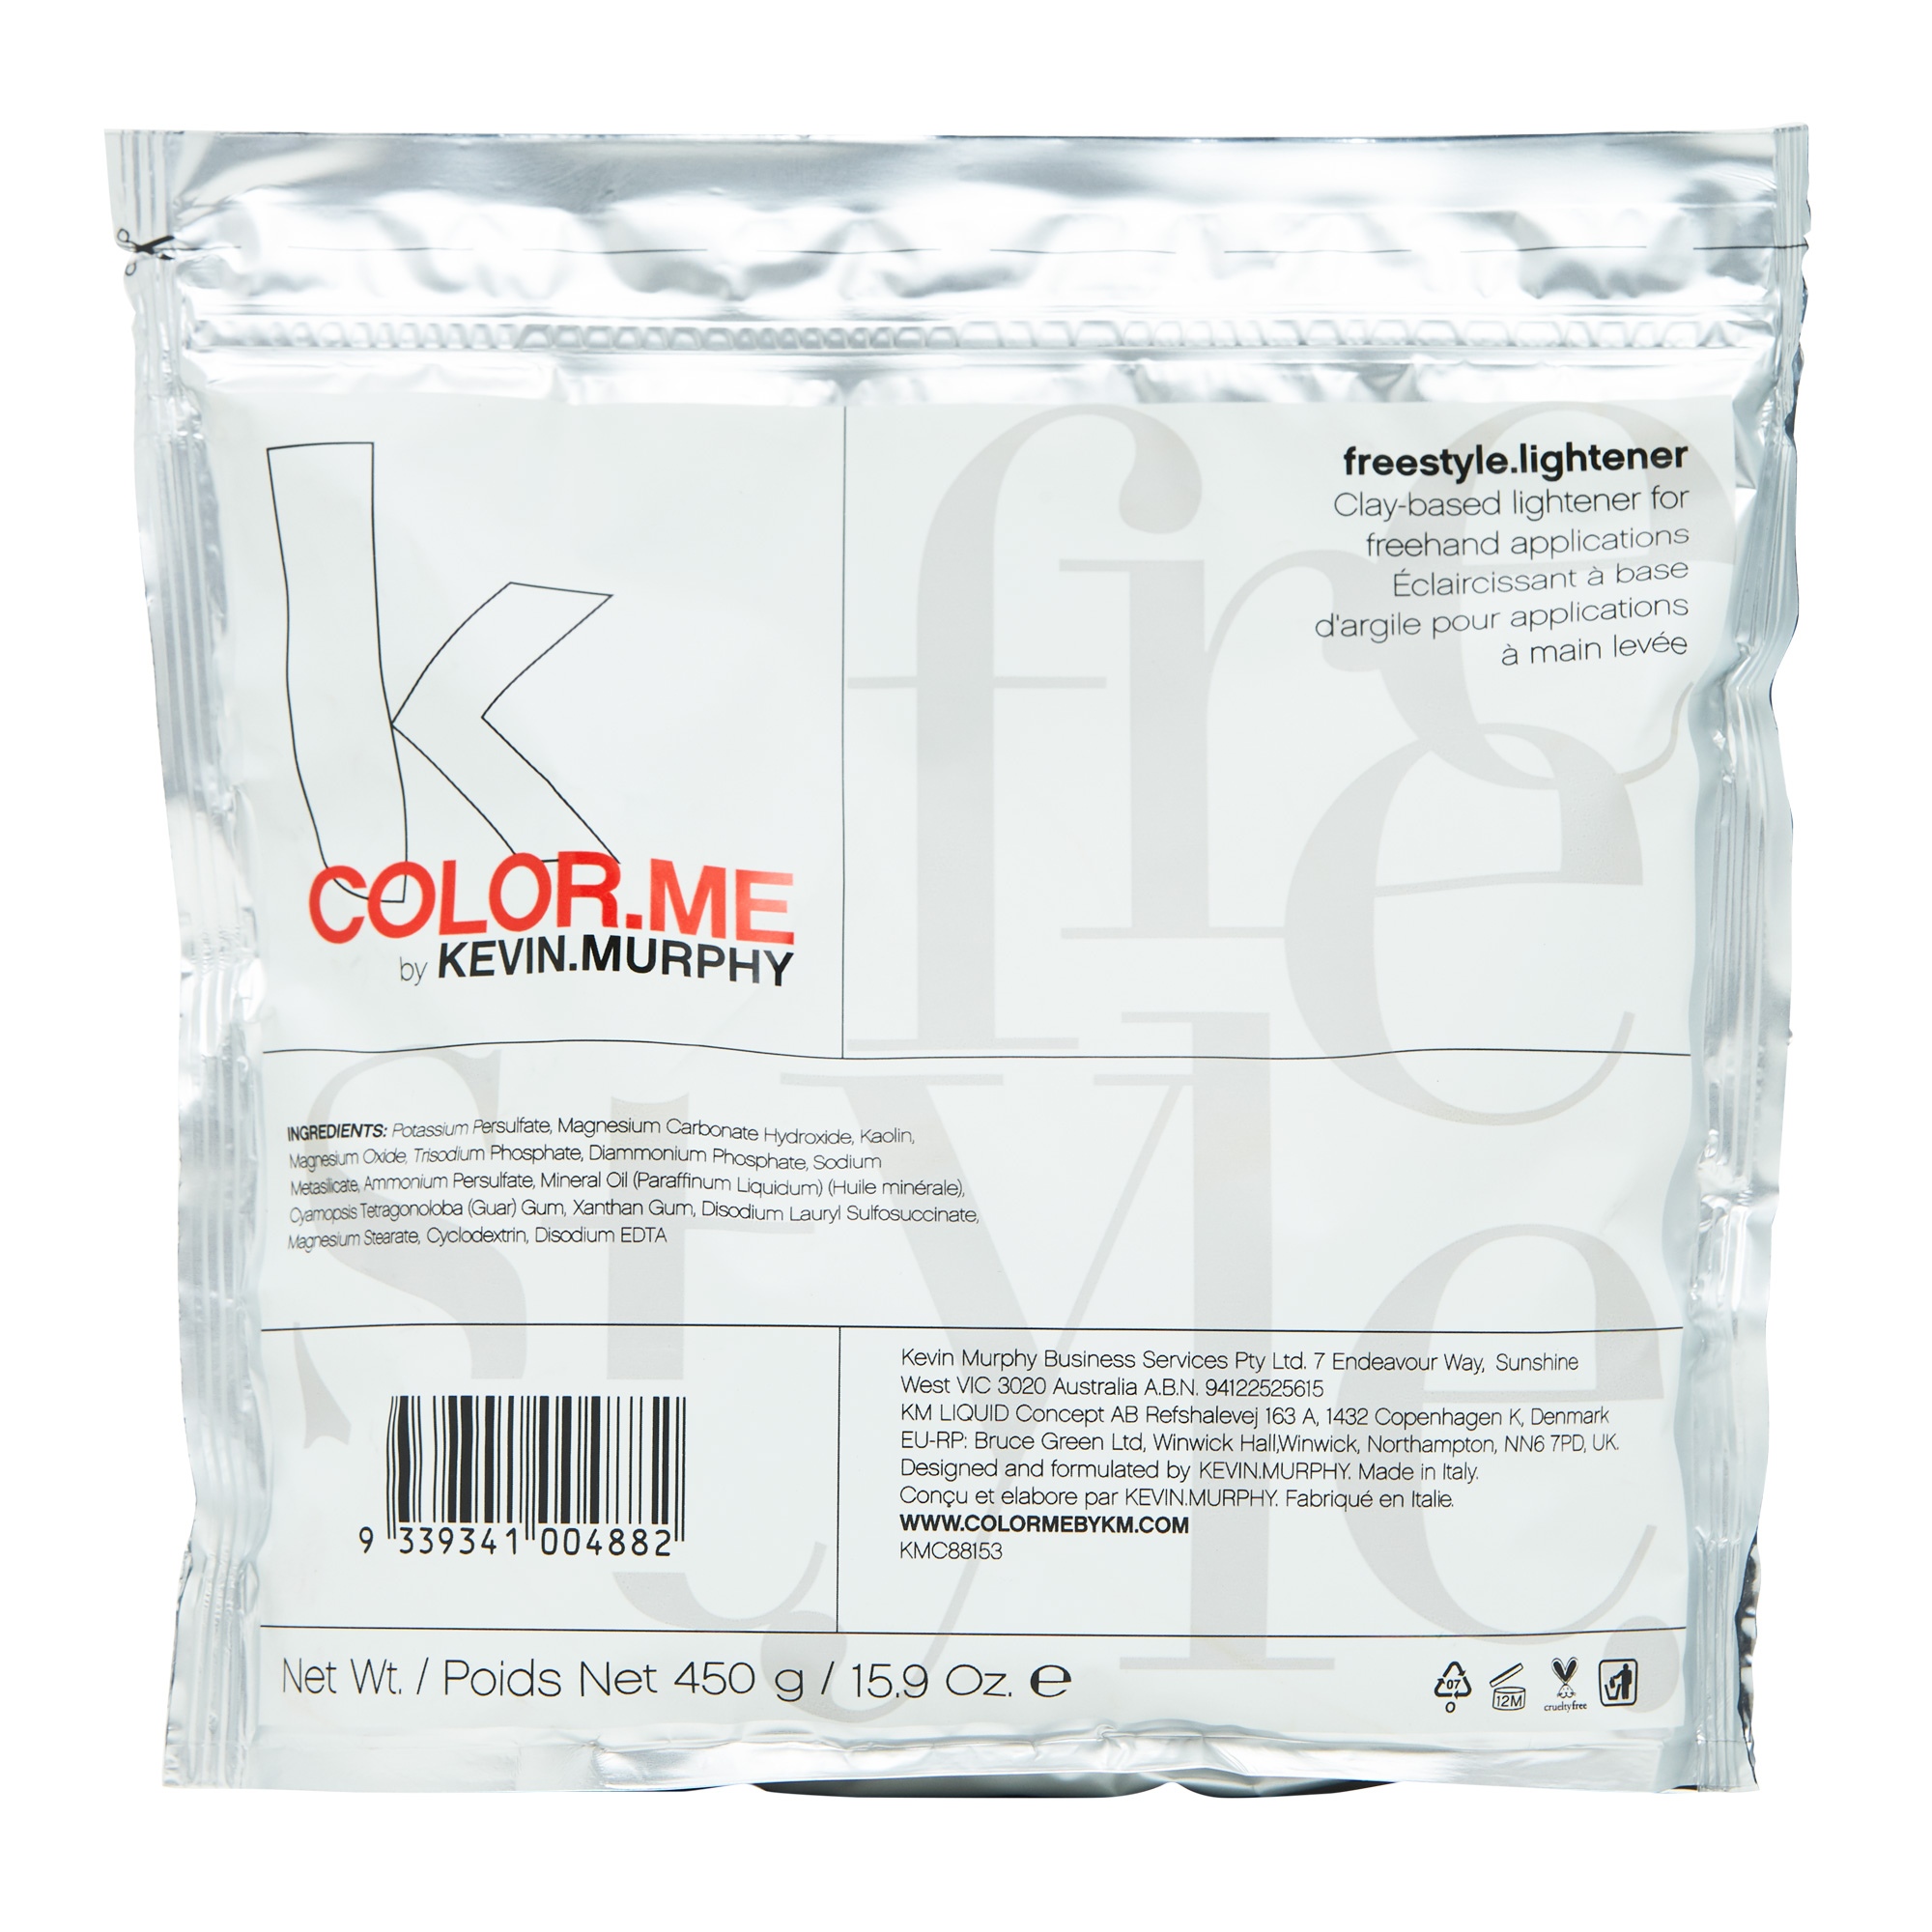 KEVIN.MURPHY COLOR.ME Tools-Freestyle Lightener Refill